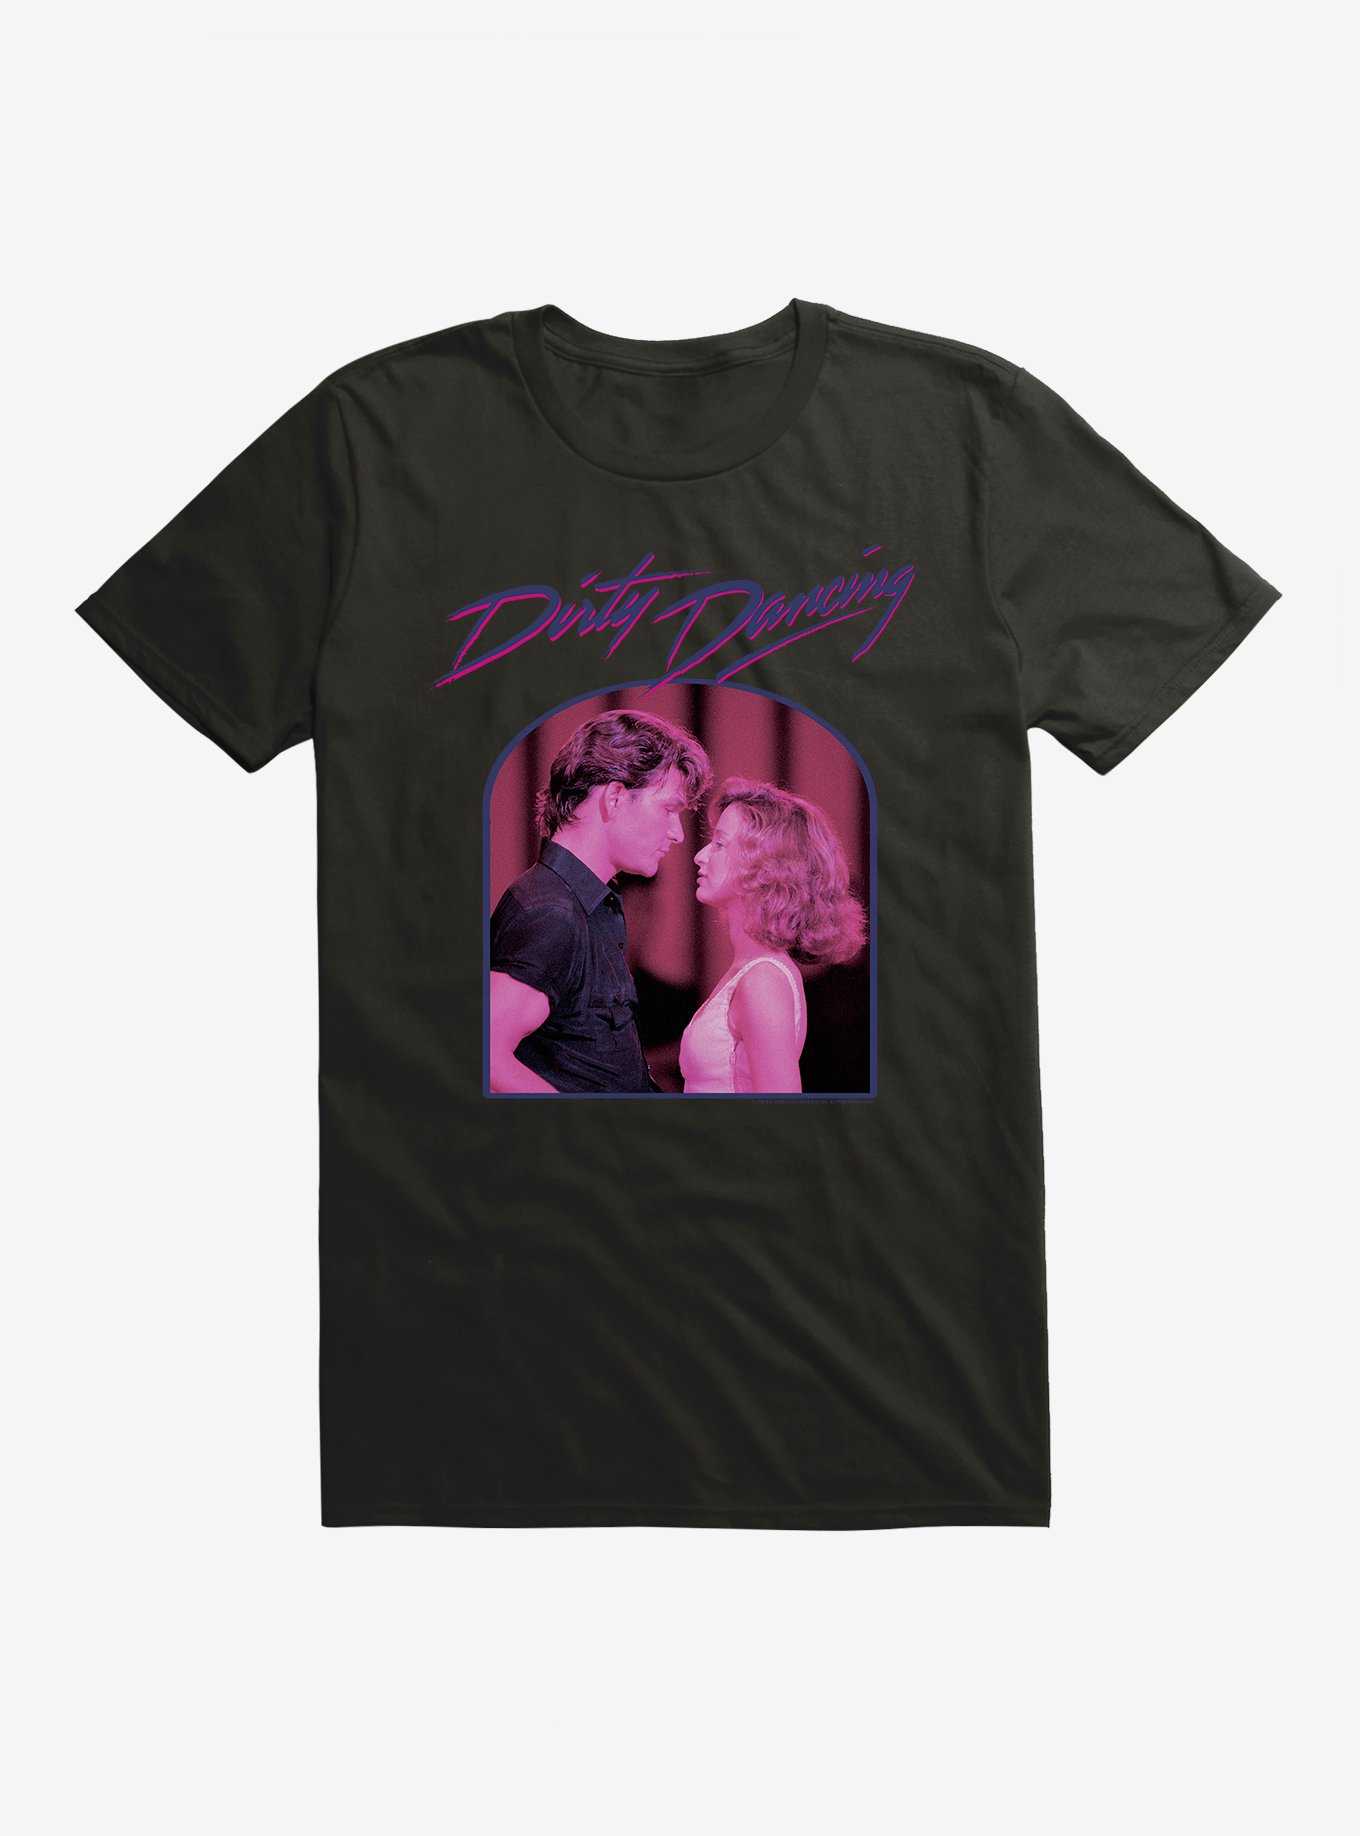 Dirty Dancing Johnny And Baby Portrait T-Shirt, , hi-res